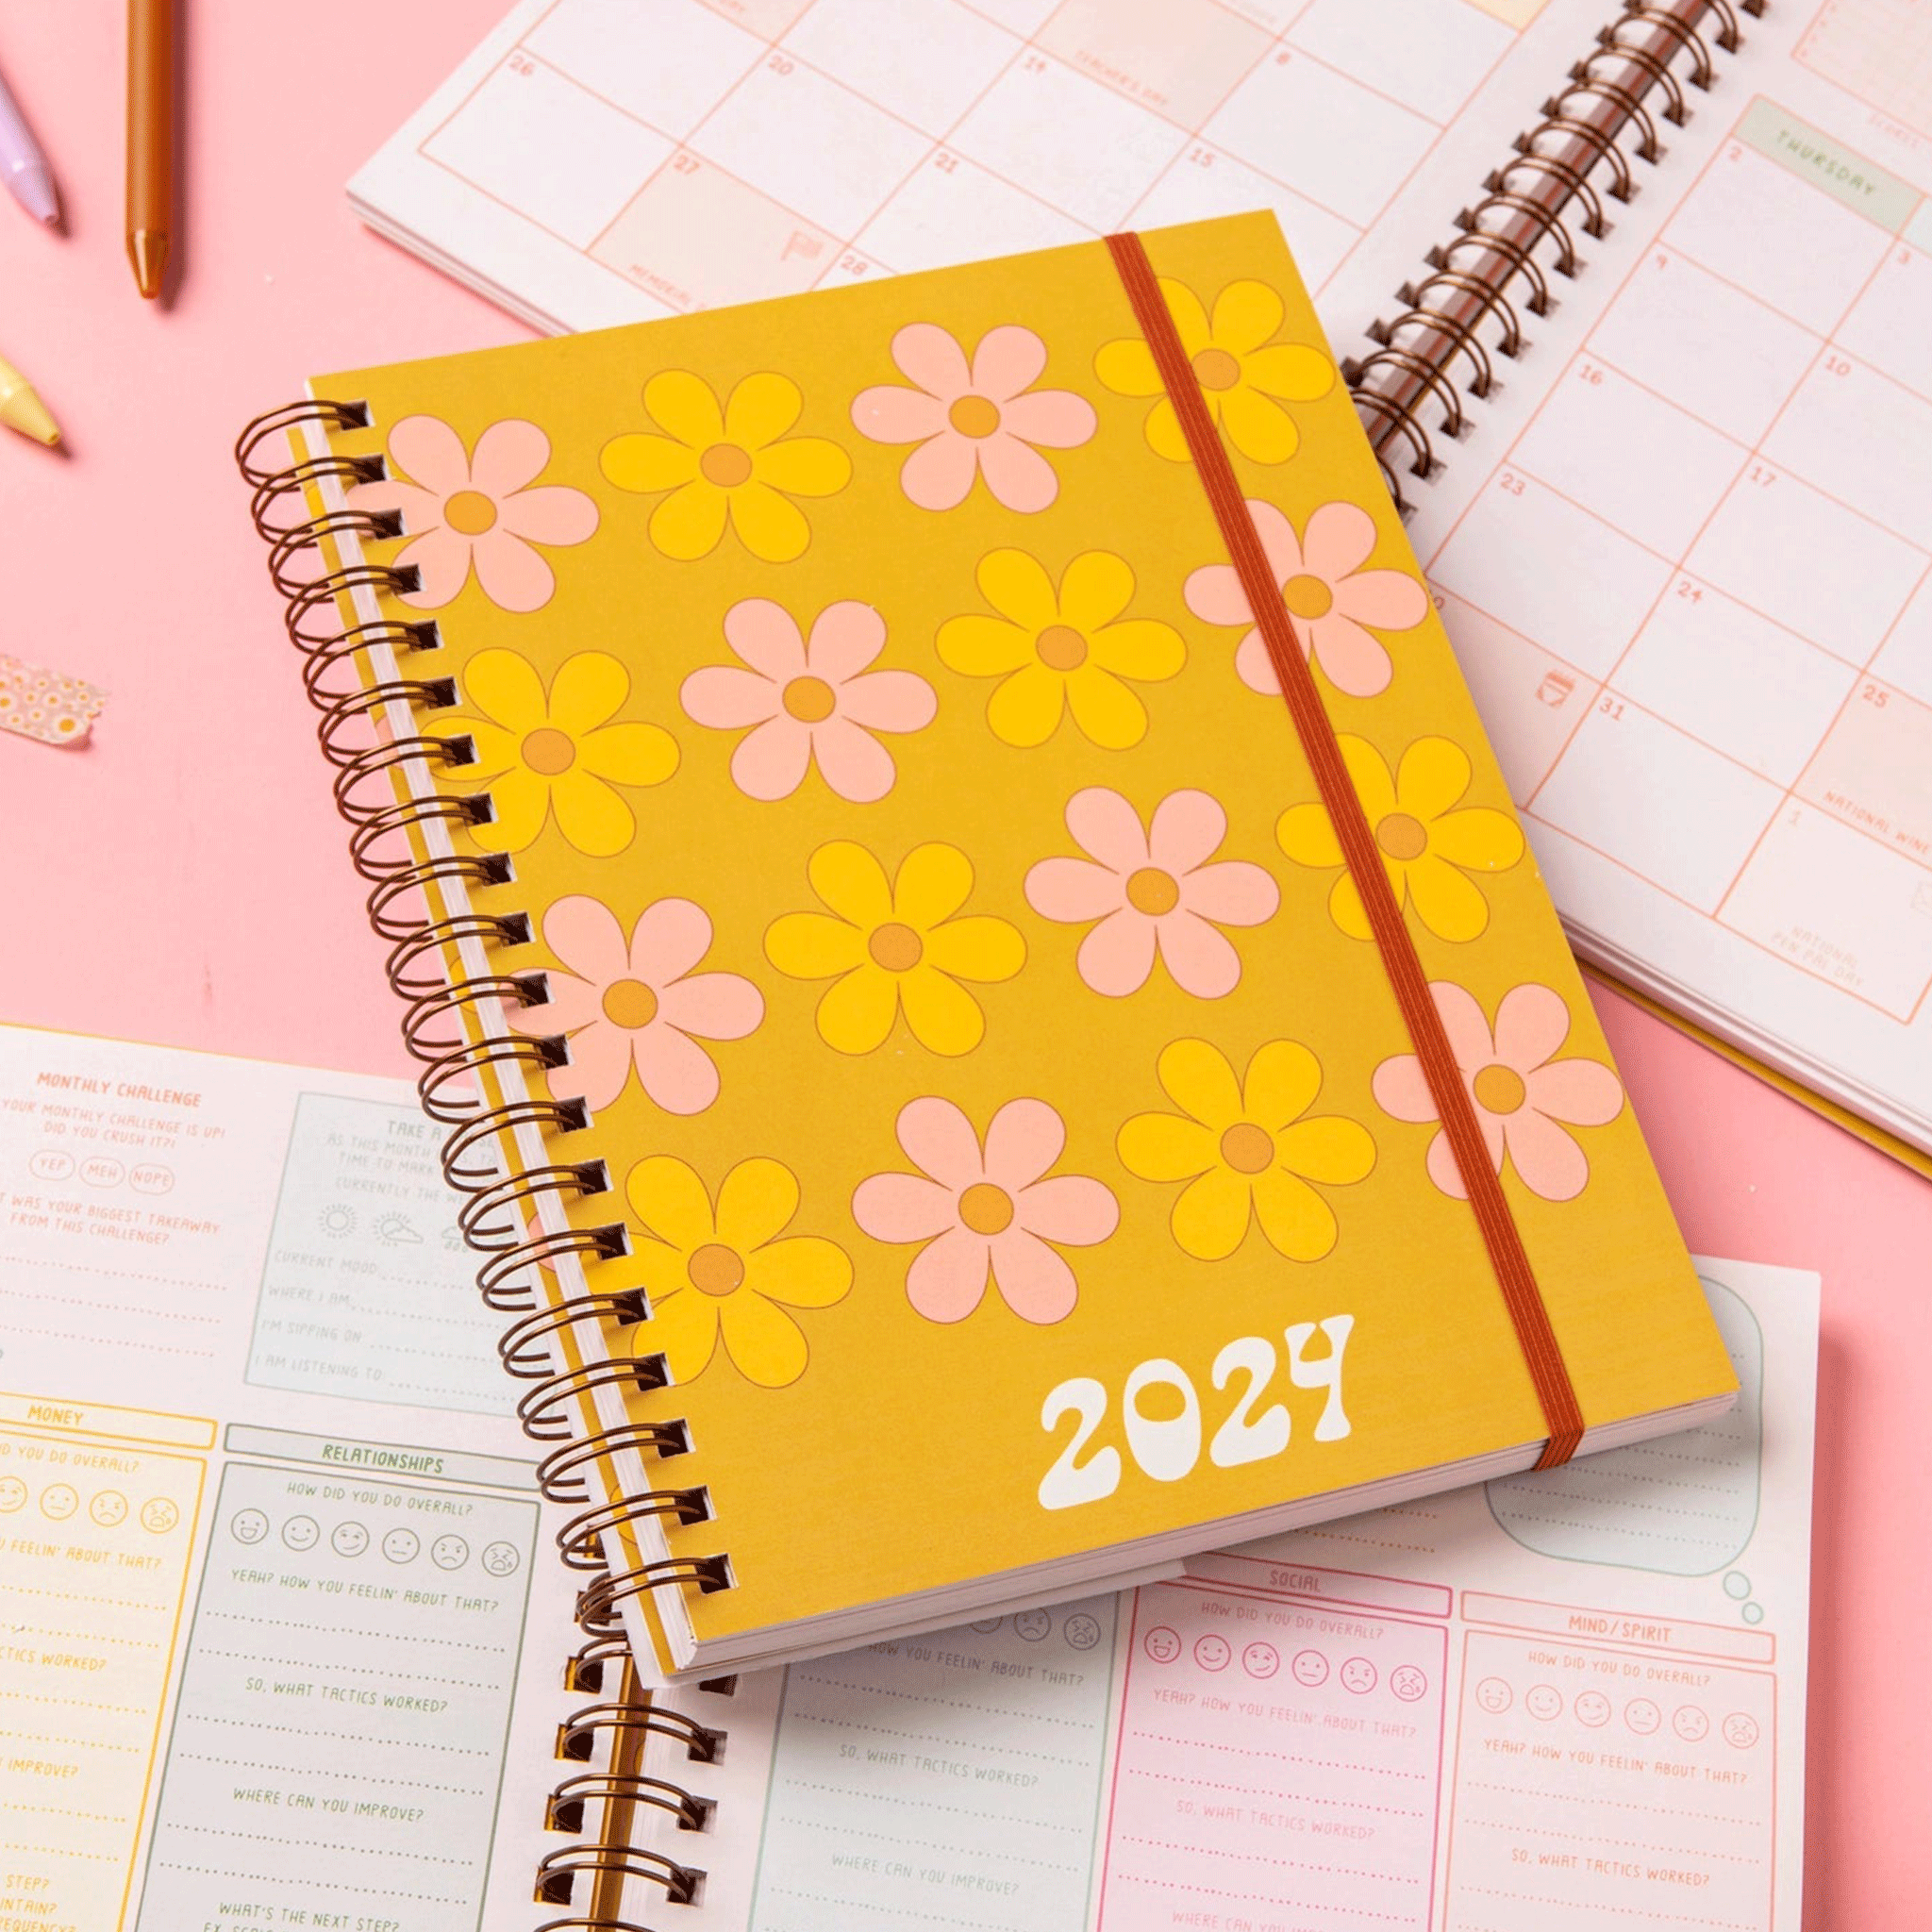 On a pink background is a yellow planner with a yellow and pink daisy daisy print with white text that reads, "2024". 